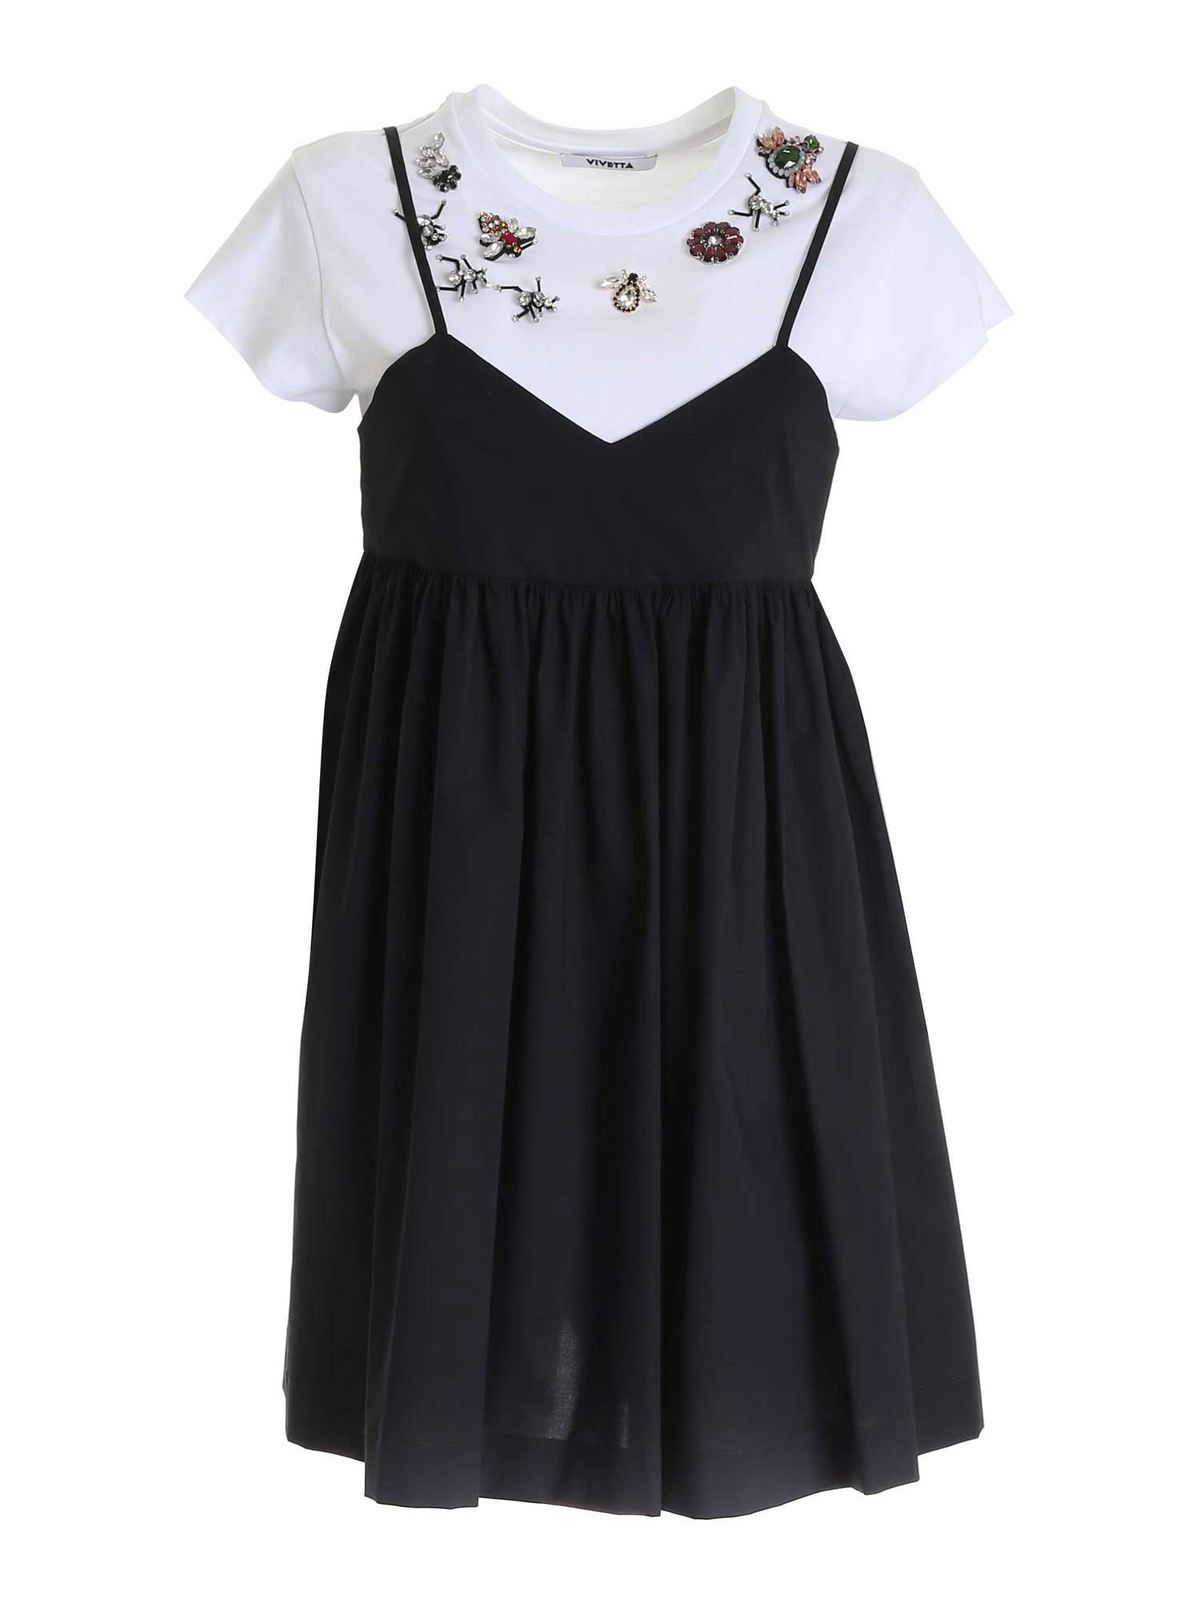 Vivetta Embellished T-shirt Dress In Black And White